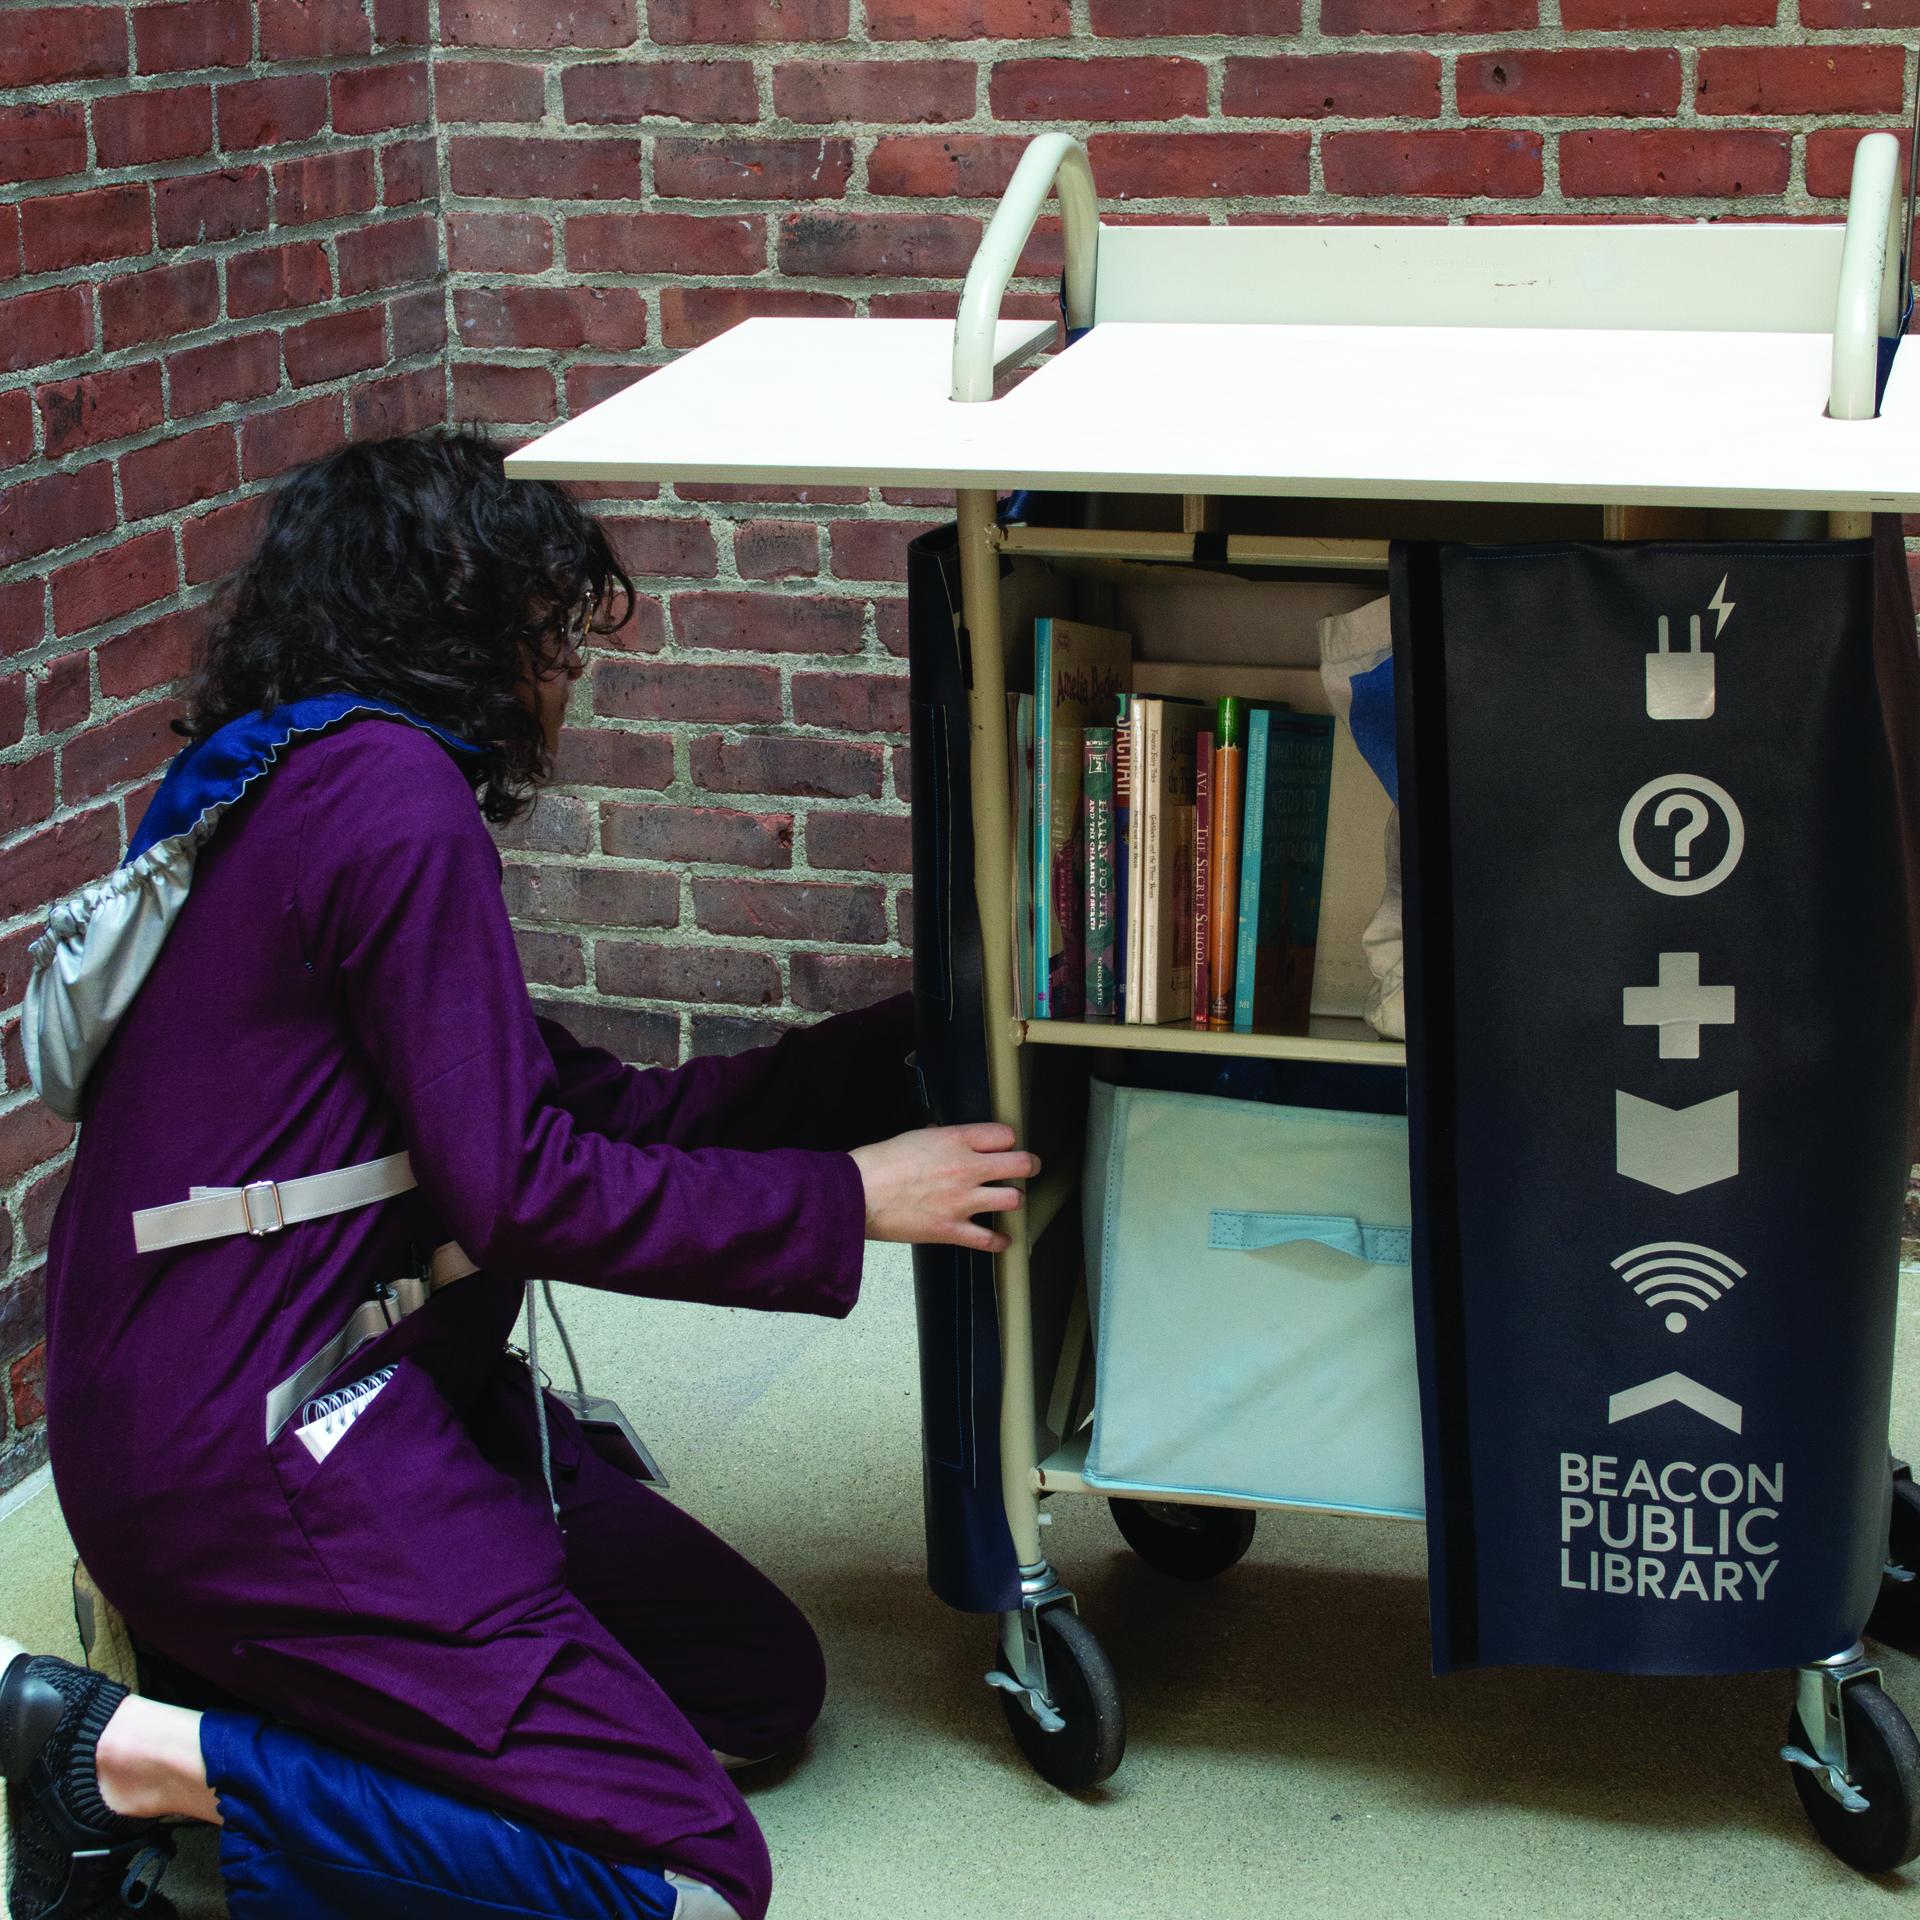 Loading the adapted library cart